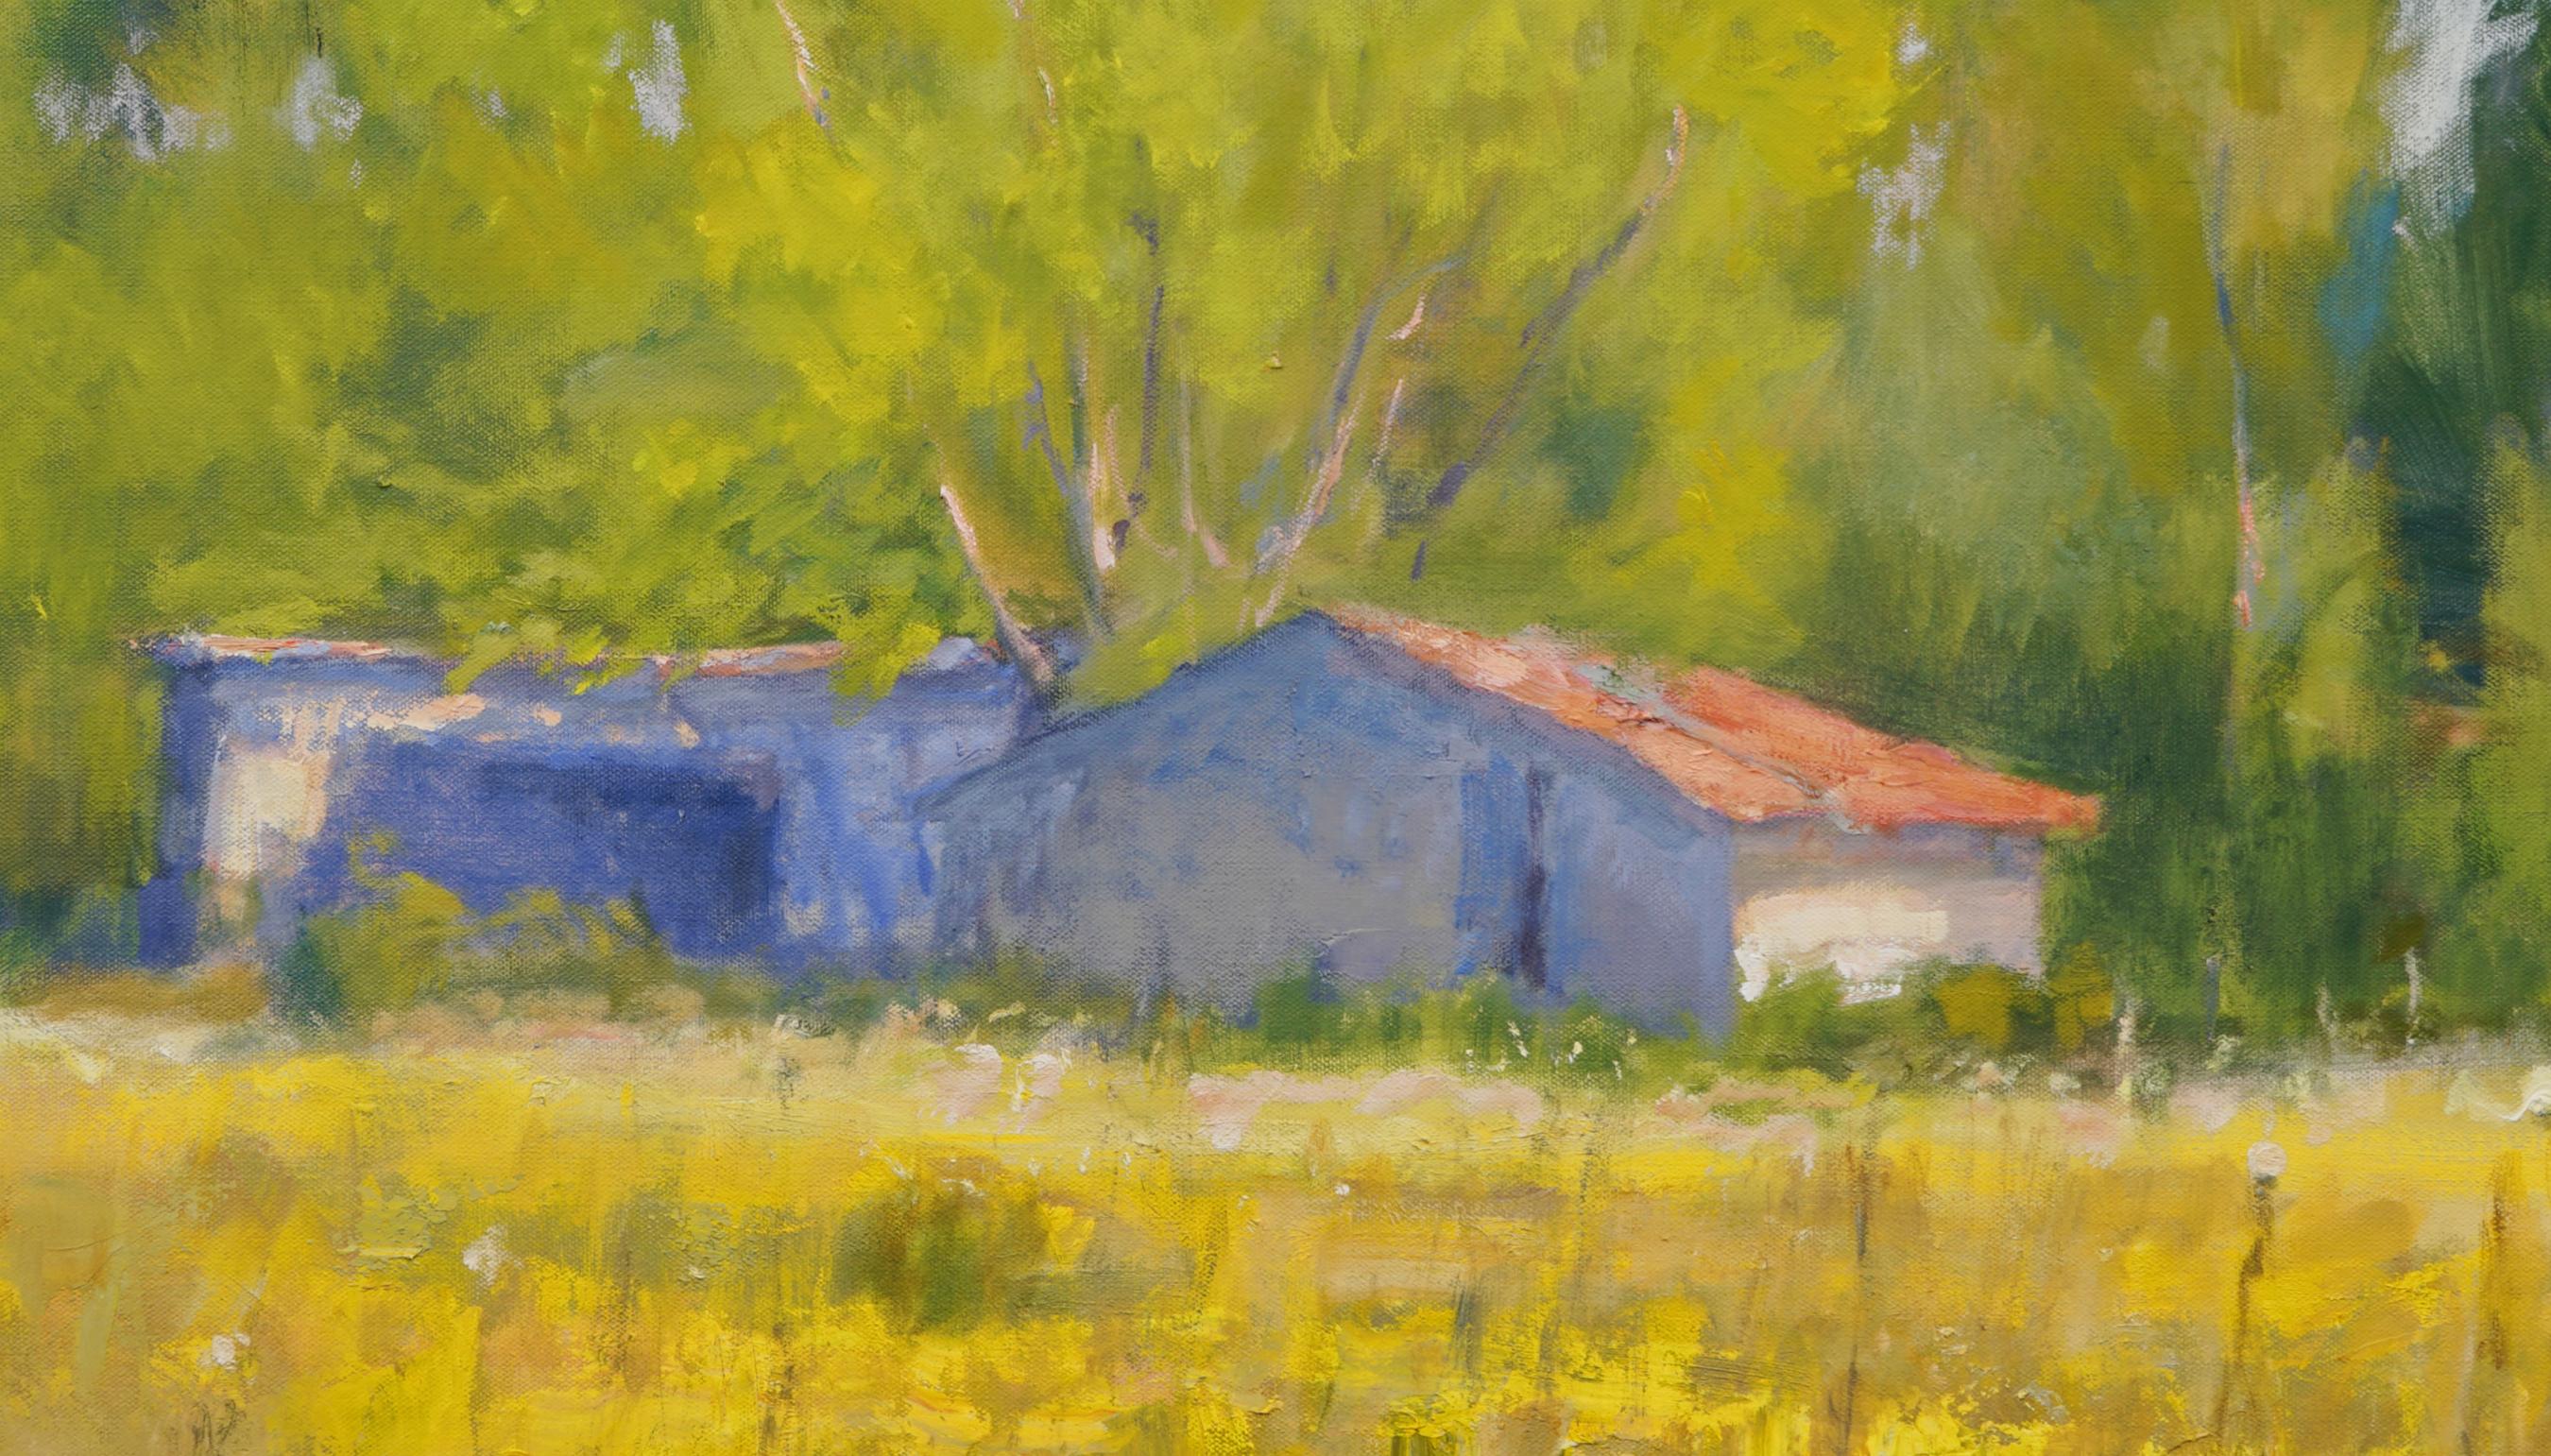  Late Afternoon , Texas Landscape, Oil, American Impressionism, Barn, Sun 36x36 - American Impressionist Painting by Steve Parker